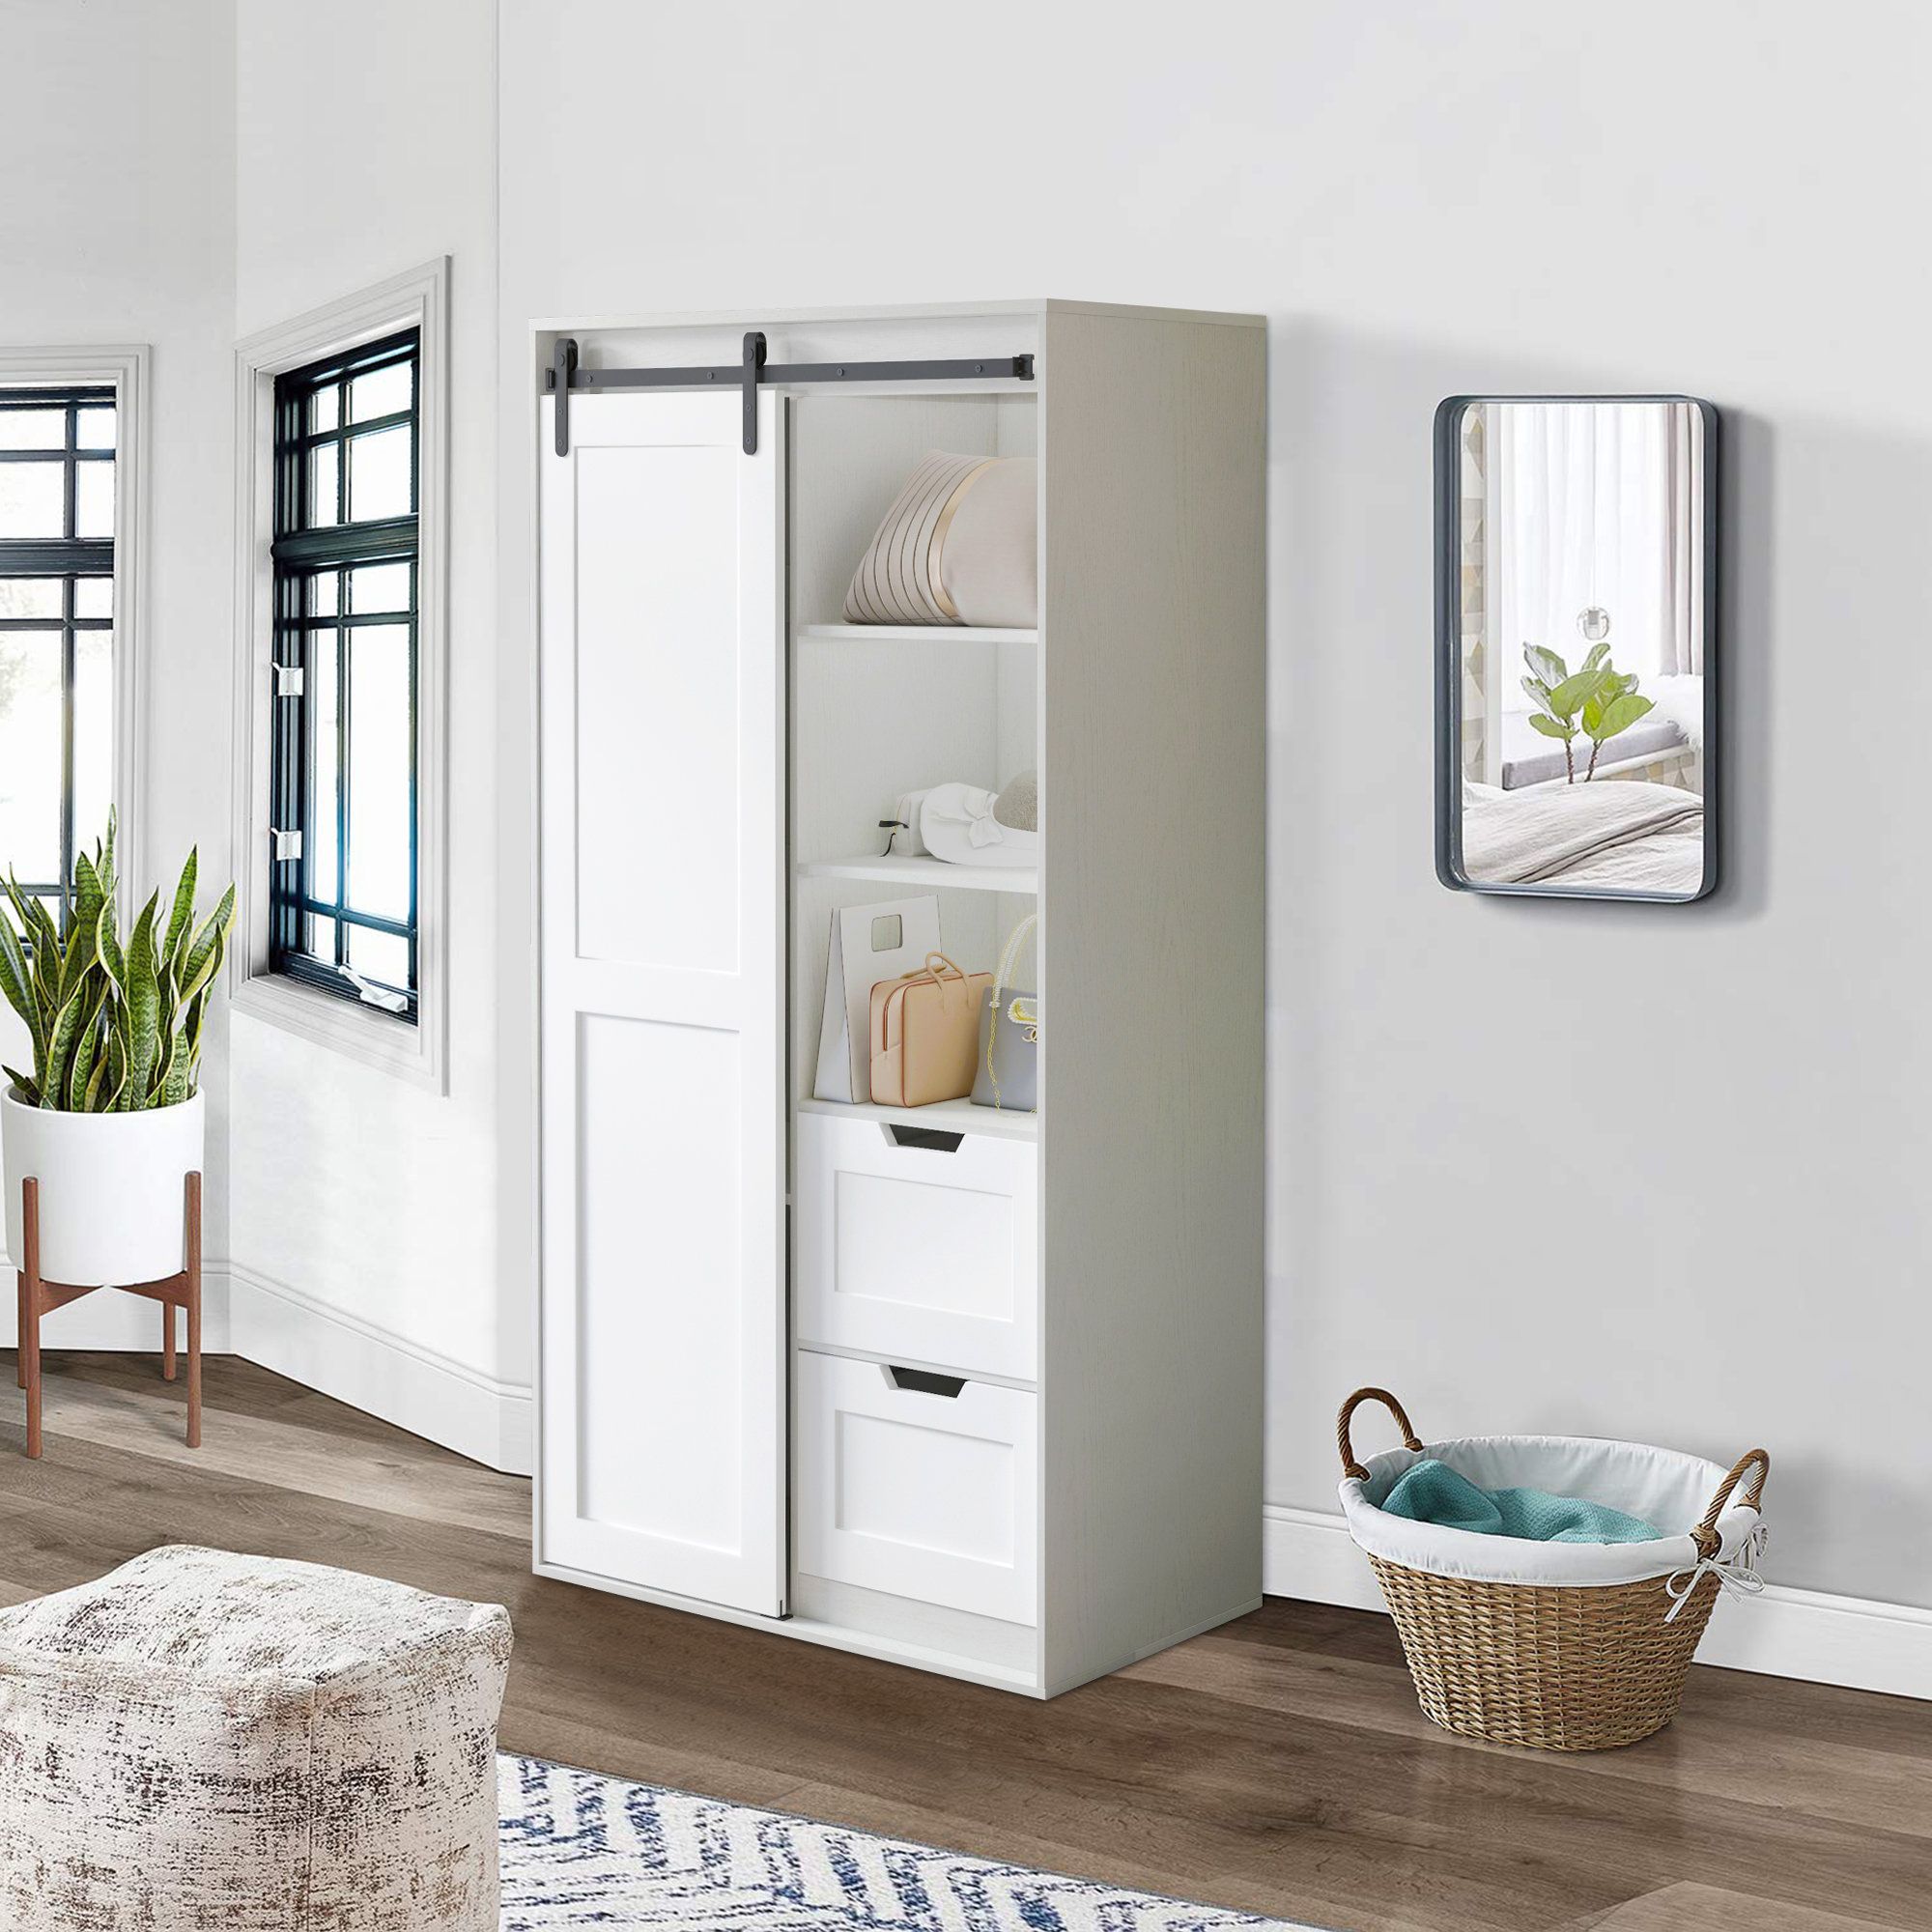 Gracie Oaks Cathkin 71"h Wardrobe Closet With Hanging Rod, Cabinet With 2  Drawers & 2 Shelves, Sliding Door | Wayfair Intended For Wardrobes With Hanging Rod (Gallery 9 of 20)